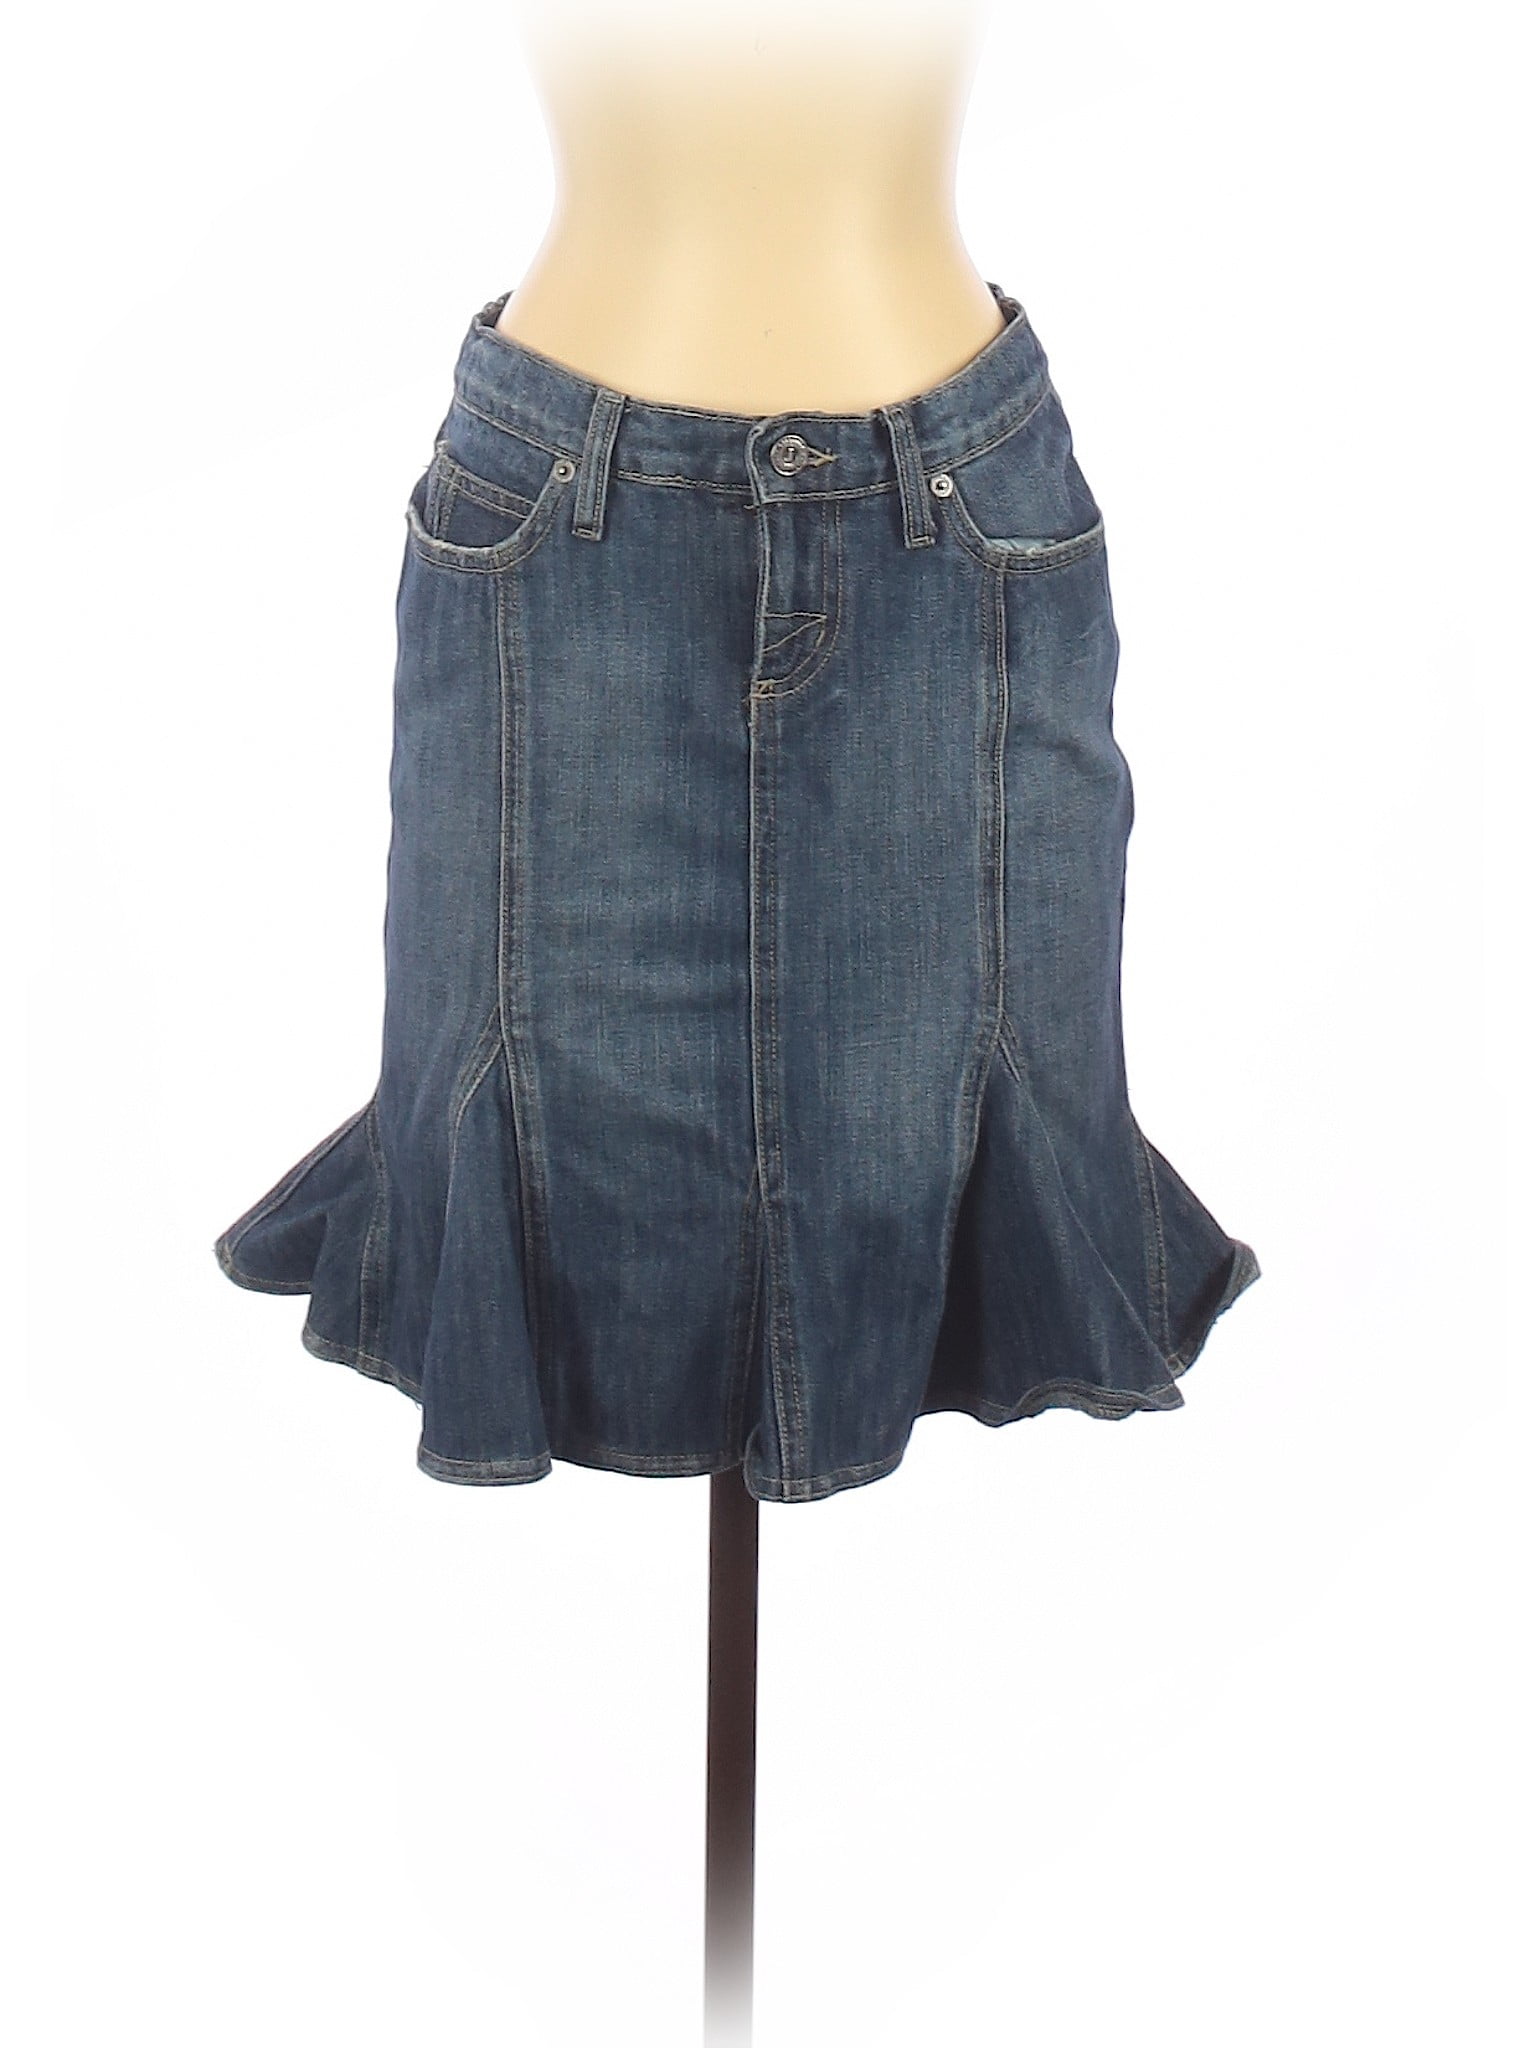 Juicy Couture Pre Owned Juicy Couture Women S Size P Denim Skirt